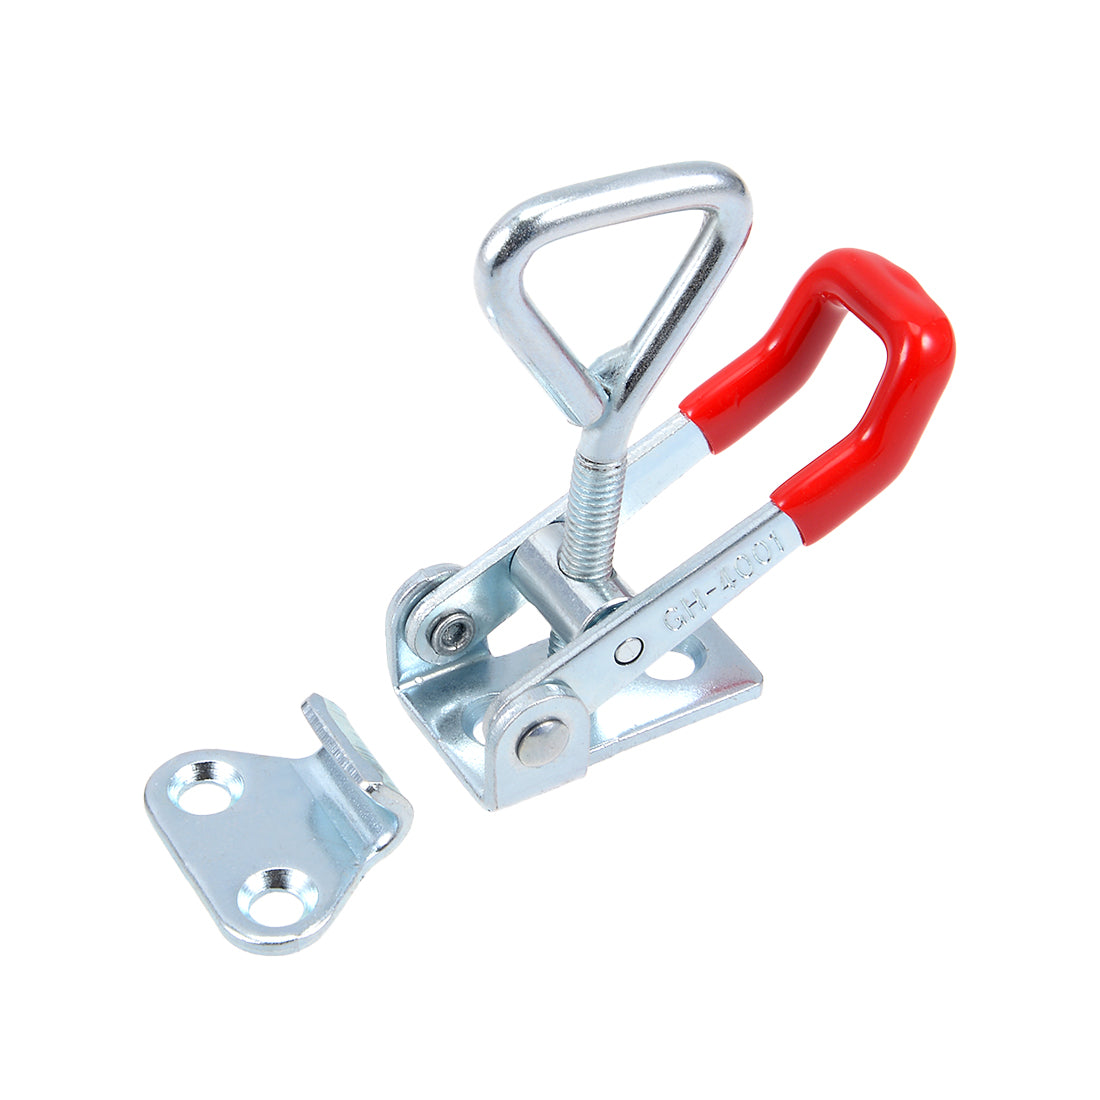 uxcell Uxcell Toggle Latch Clamp 150Kg 330lbs Capacity Pull Action Adjustable Latch GH-4001